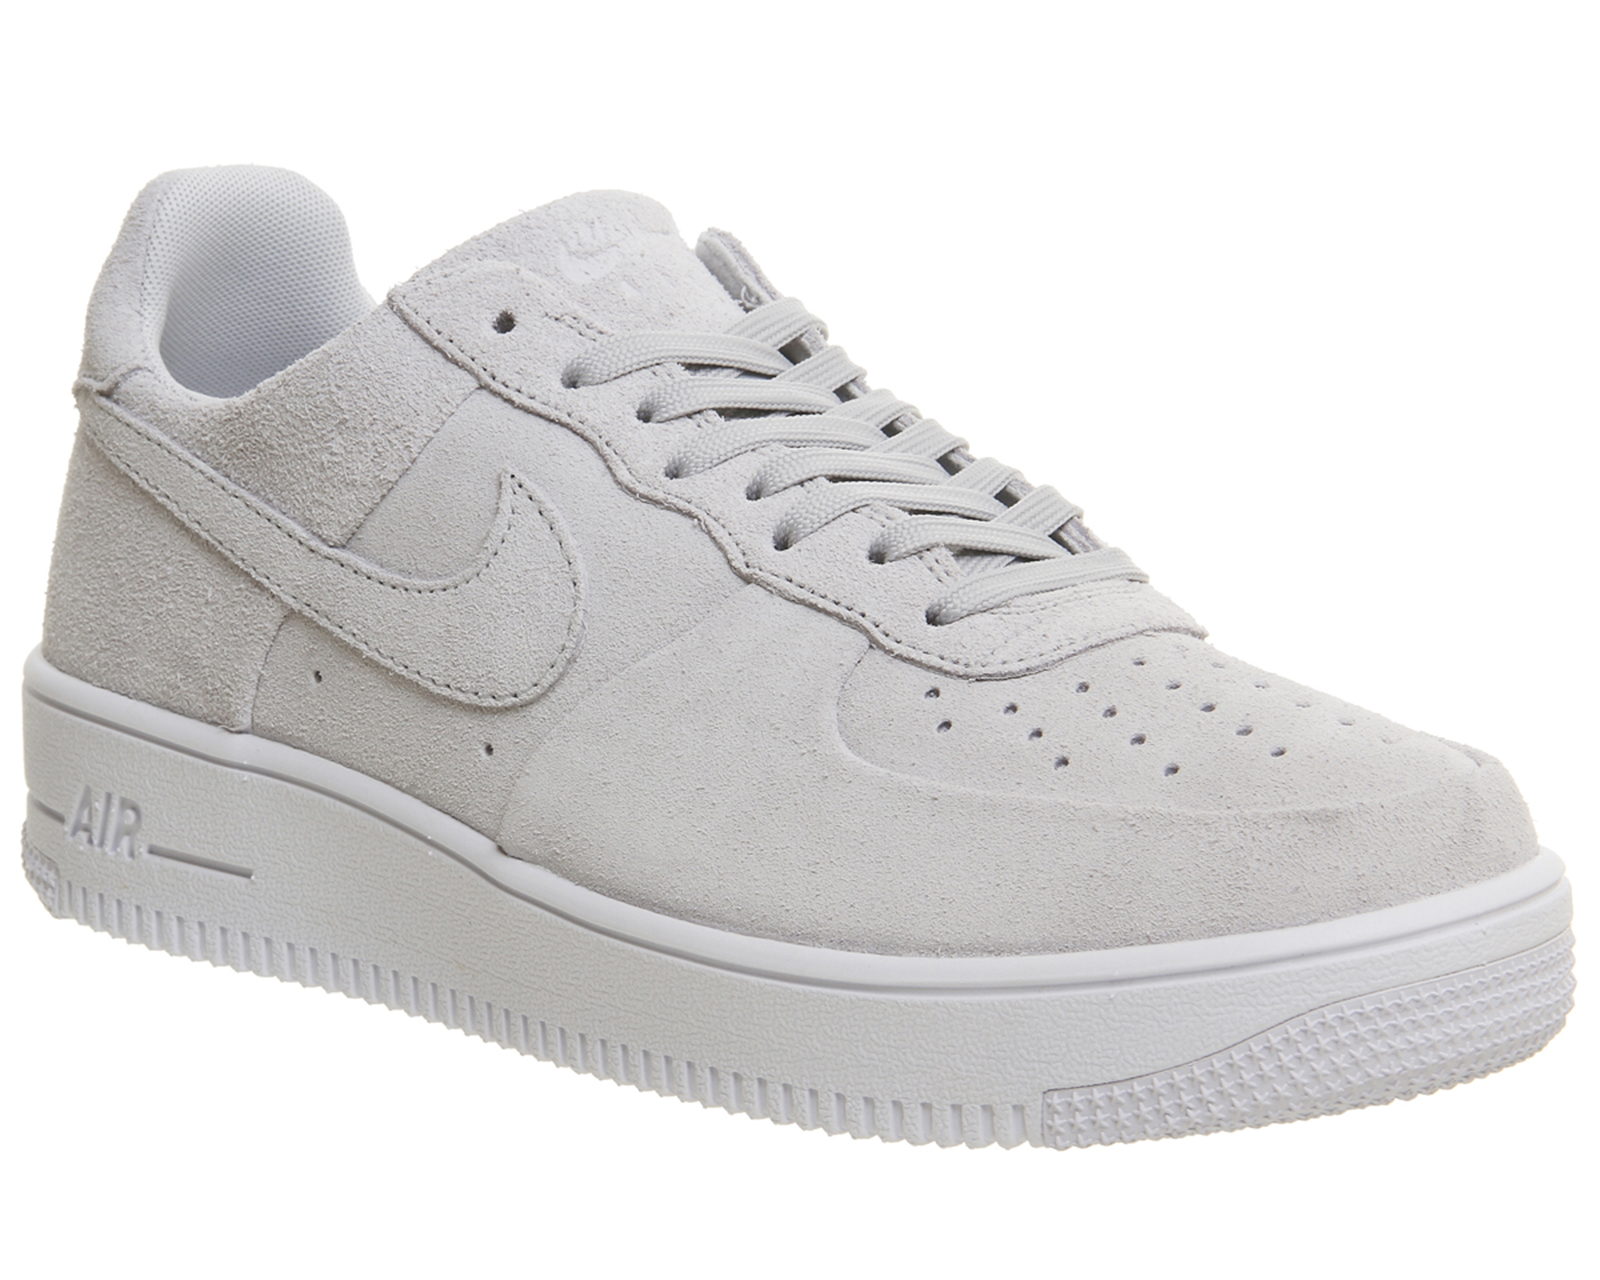 Nike Af1 Ultra Force Pure Platinum Grey - His trainers